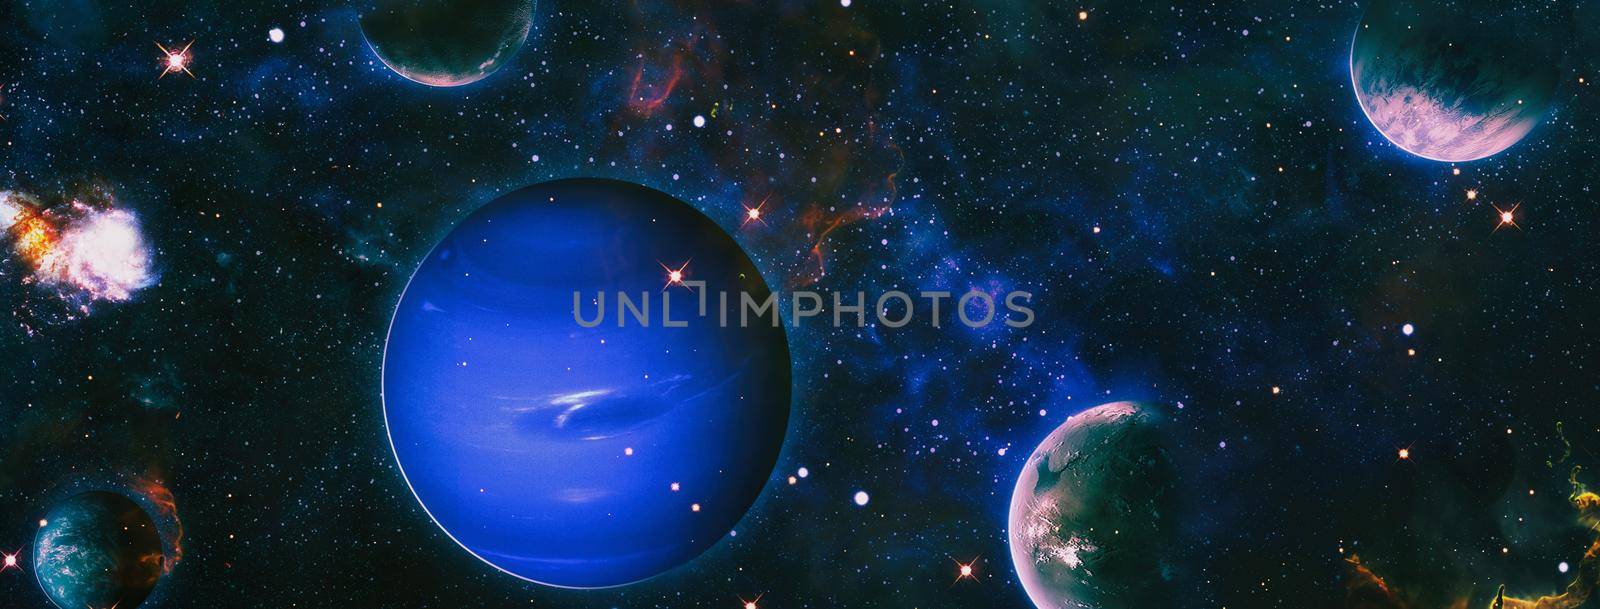 Space scene with planets, stars and galaxies. Spiral galaxy in deep space. Stars of a planet and galaxy in a free space. Elements of this image furnished by NASA. by Maximusnd